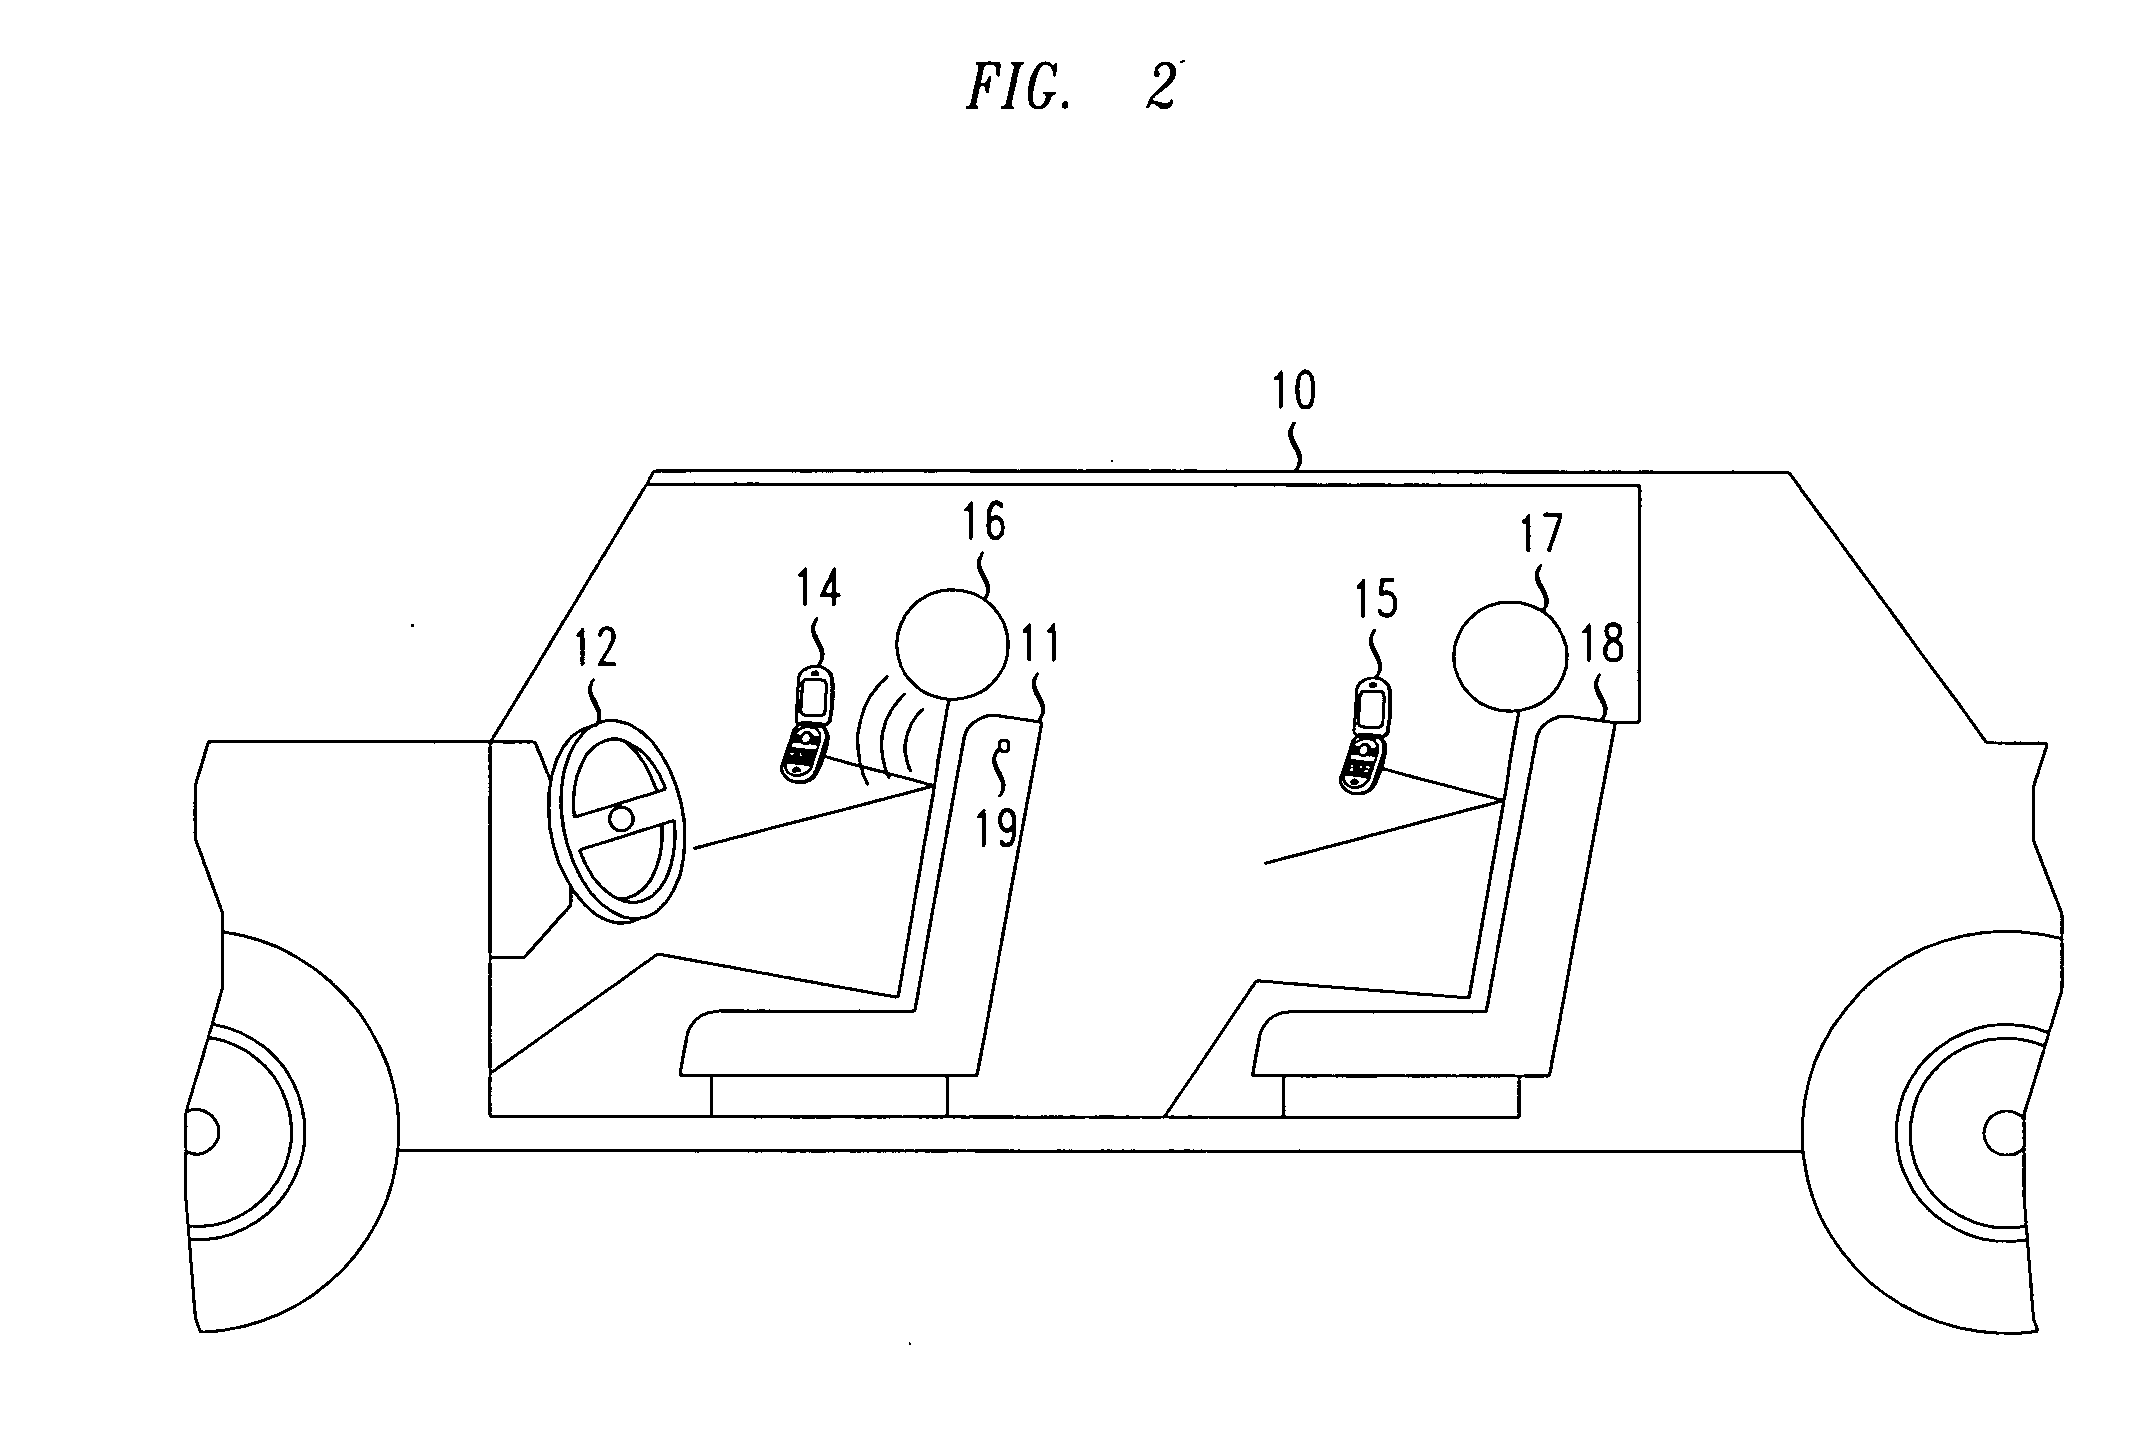 Method and apparatus for restricting the use of a mobile telecommunications device by a vehicle's driver